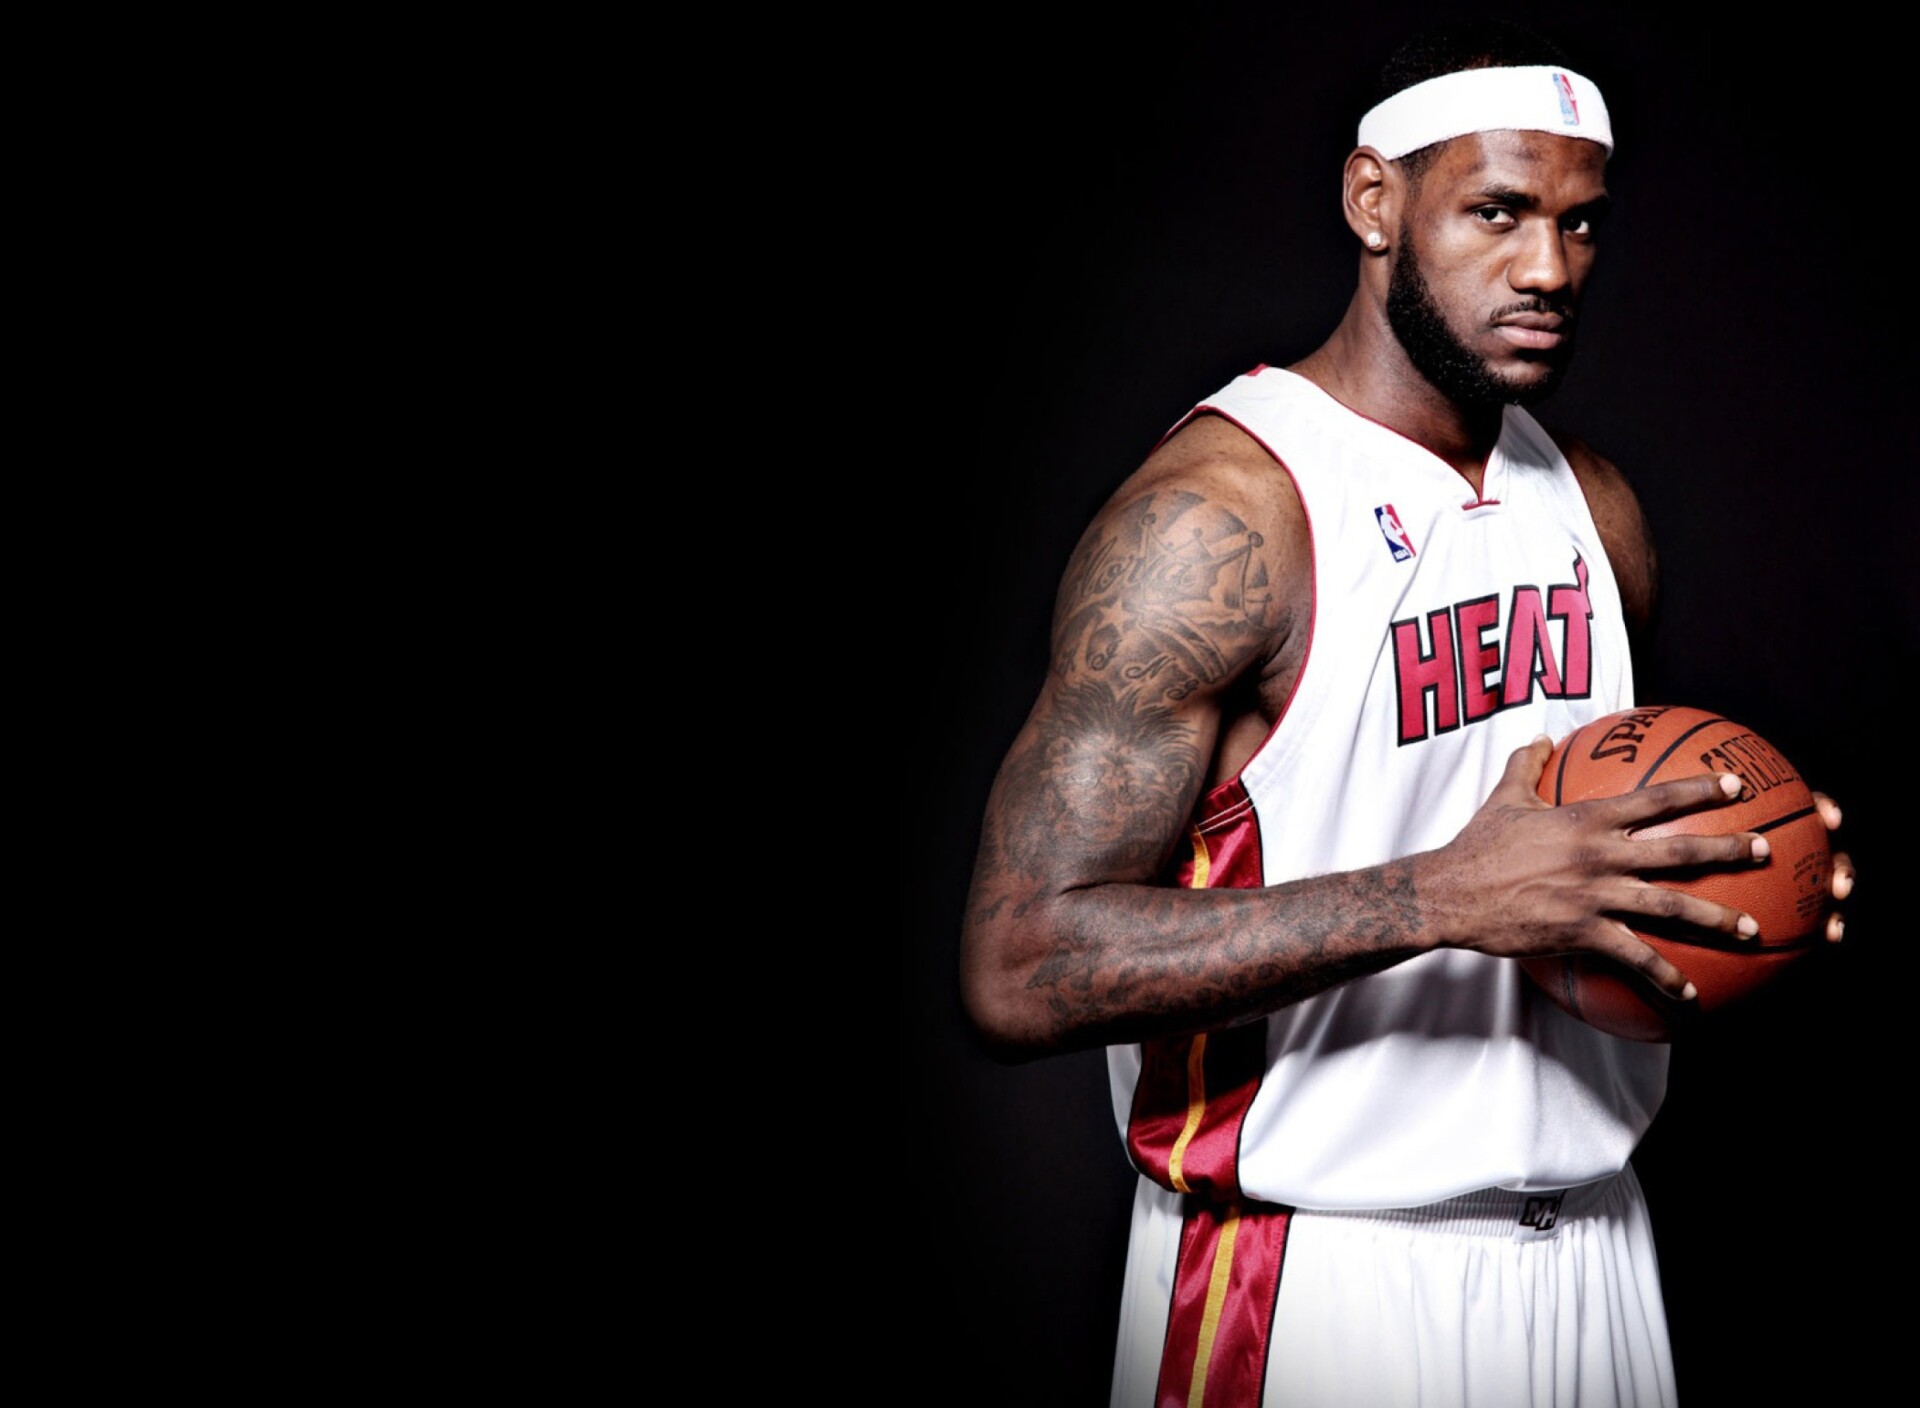 LeBron James: He left in 2010 as a free agent to join the Miami Heat, Basketball. 1920x1410 HD Background.